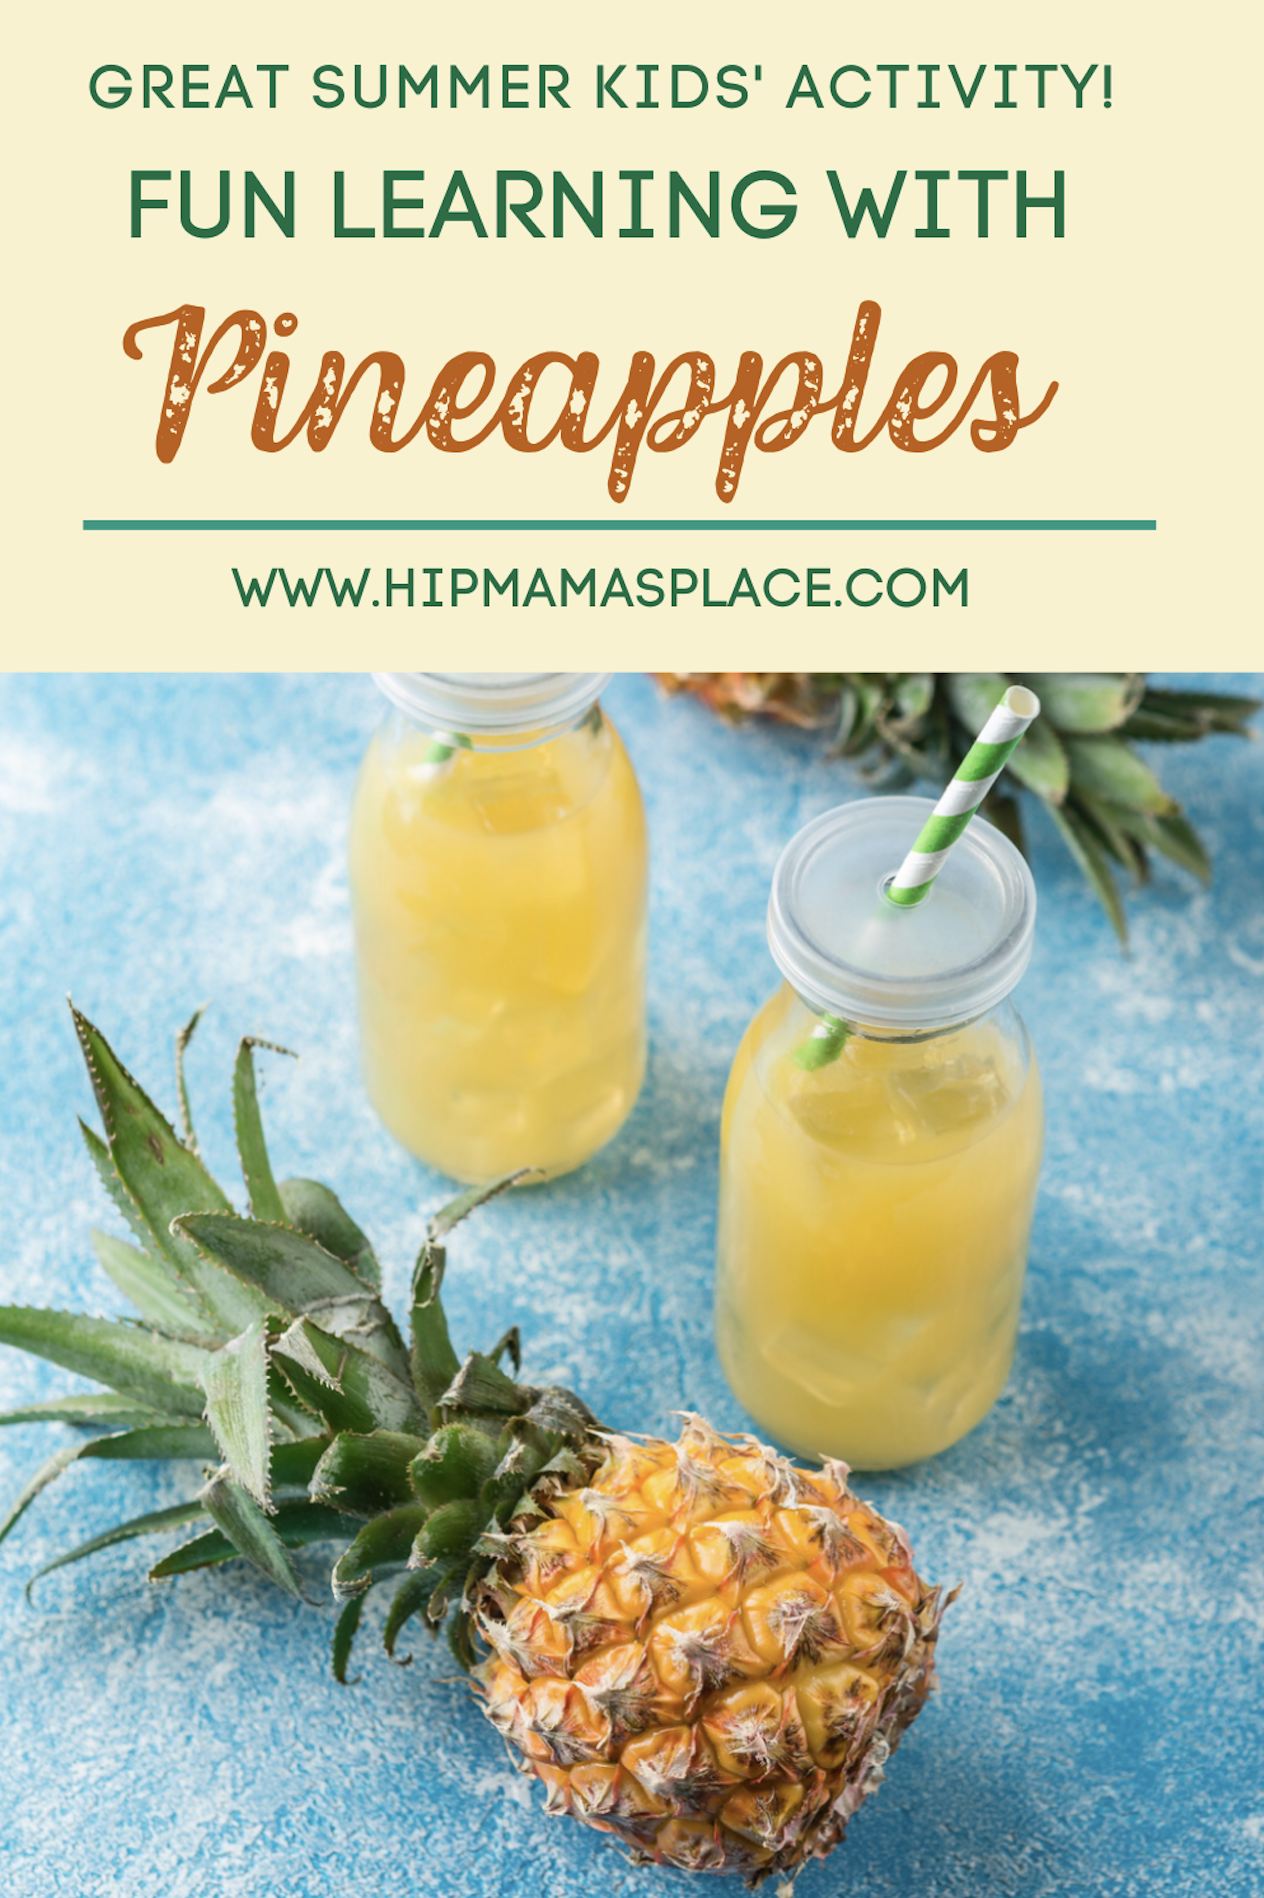 Say Aloha to fun learning with a pineapple! Read on to learn how pineapple can be used to teach your kids geography, history, nutrition, science and more! #pineapples #education #summerlearning #kids #funforkids #kidsactivities #summeractivities #homeschooling